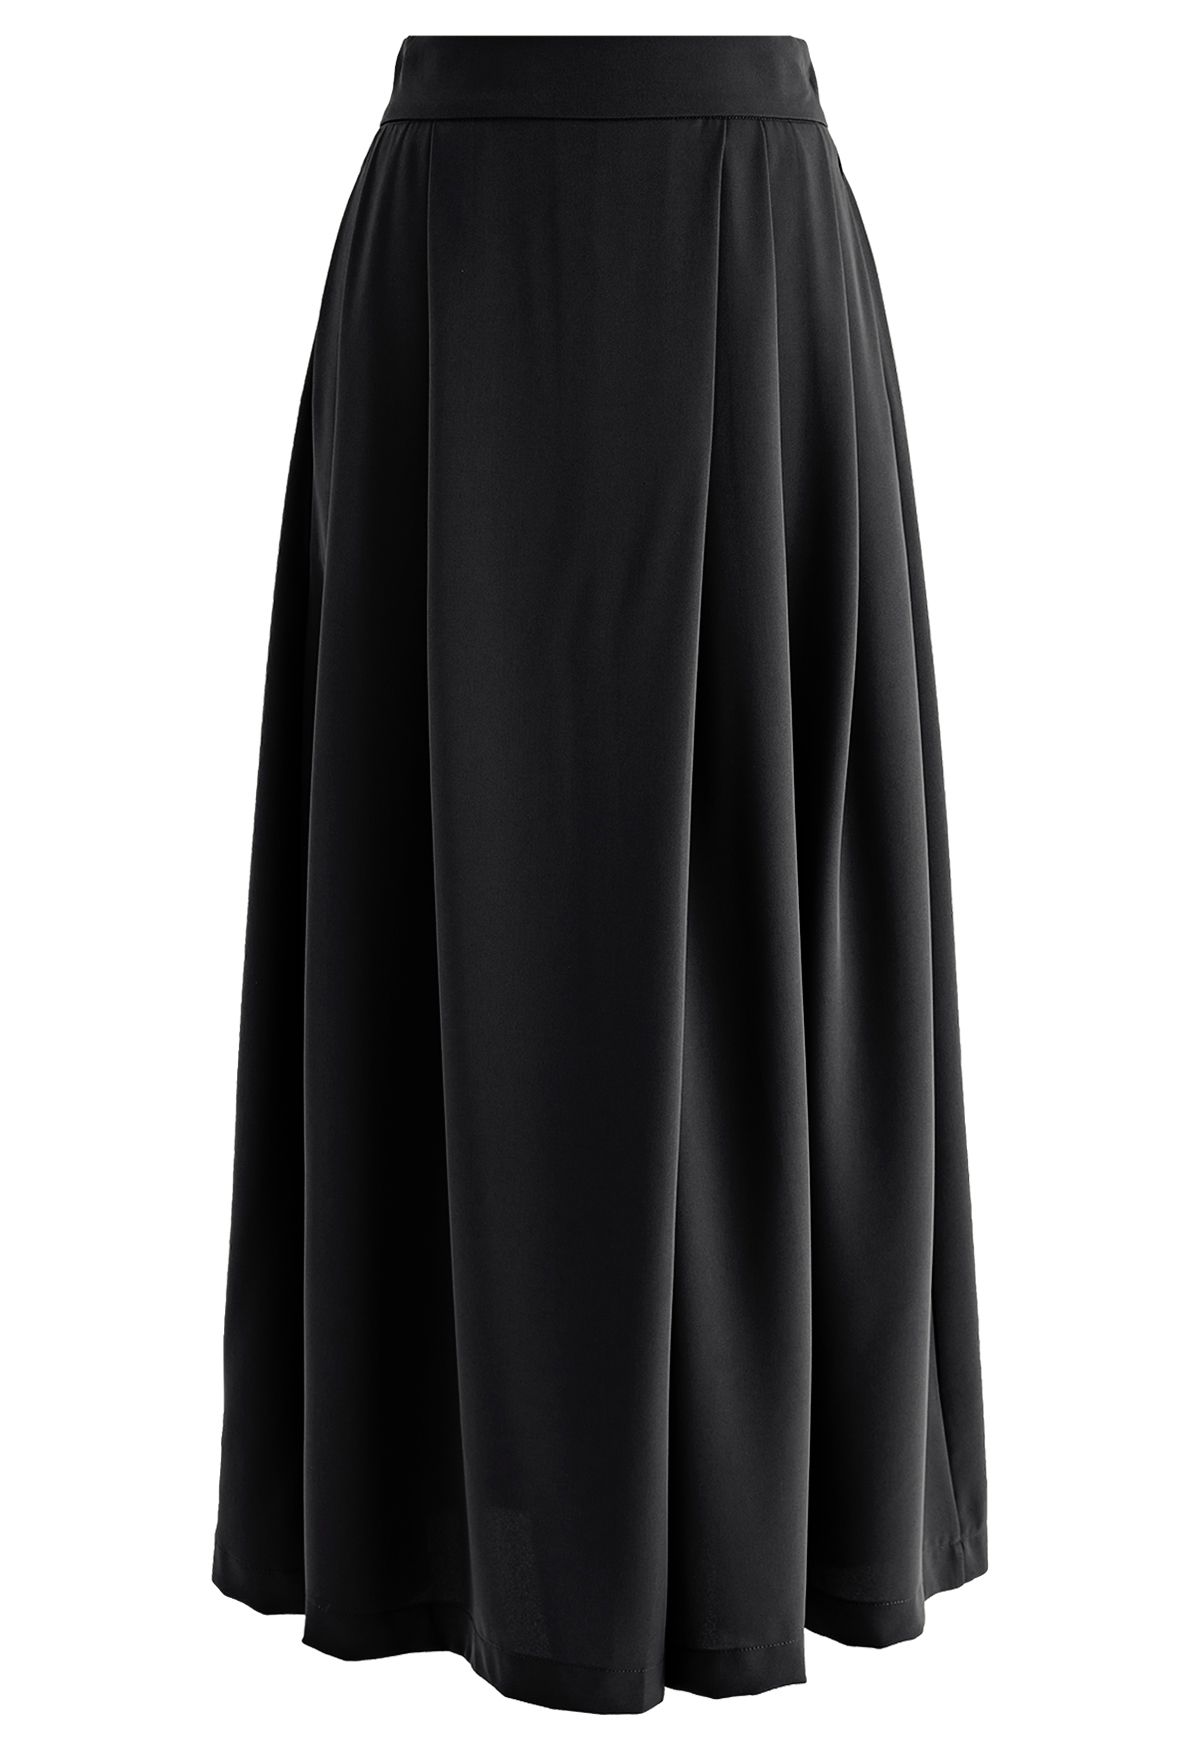 Easeful Pleated Wide-Leg Pants in Black - Retro, Indie and Unique Fashion